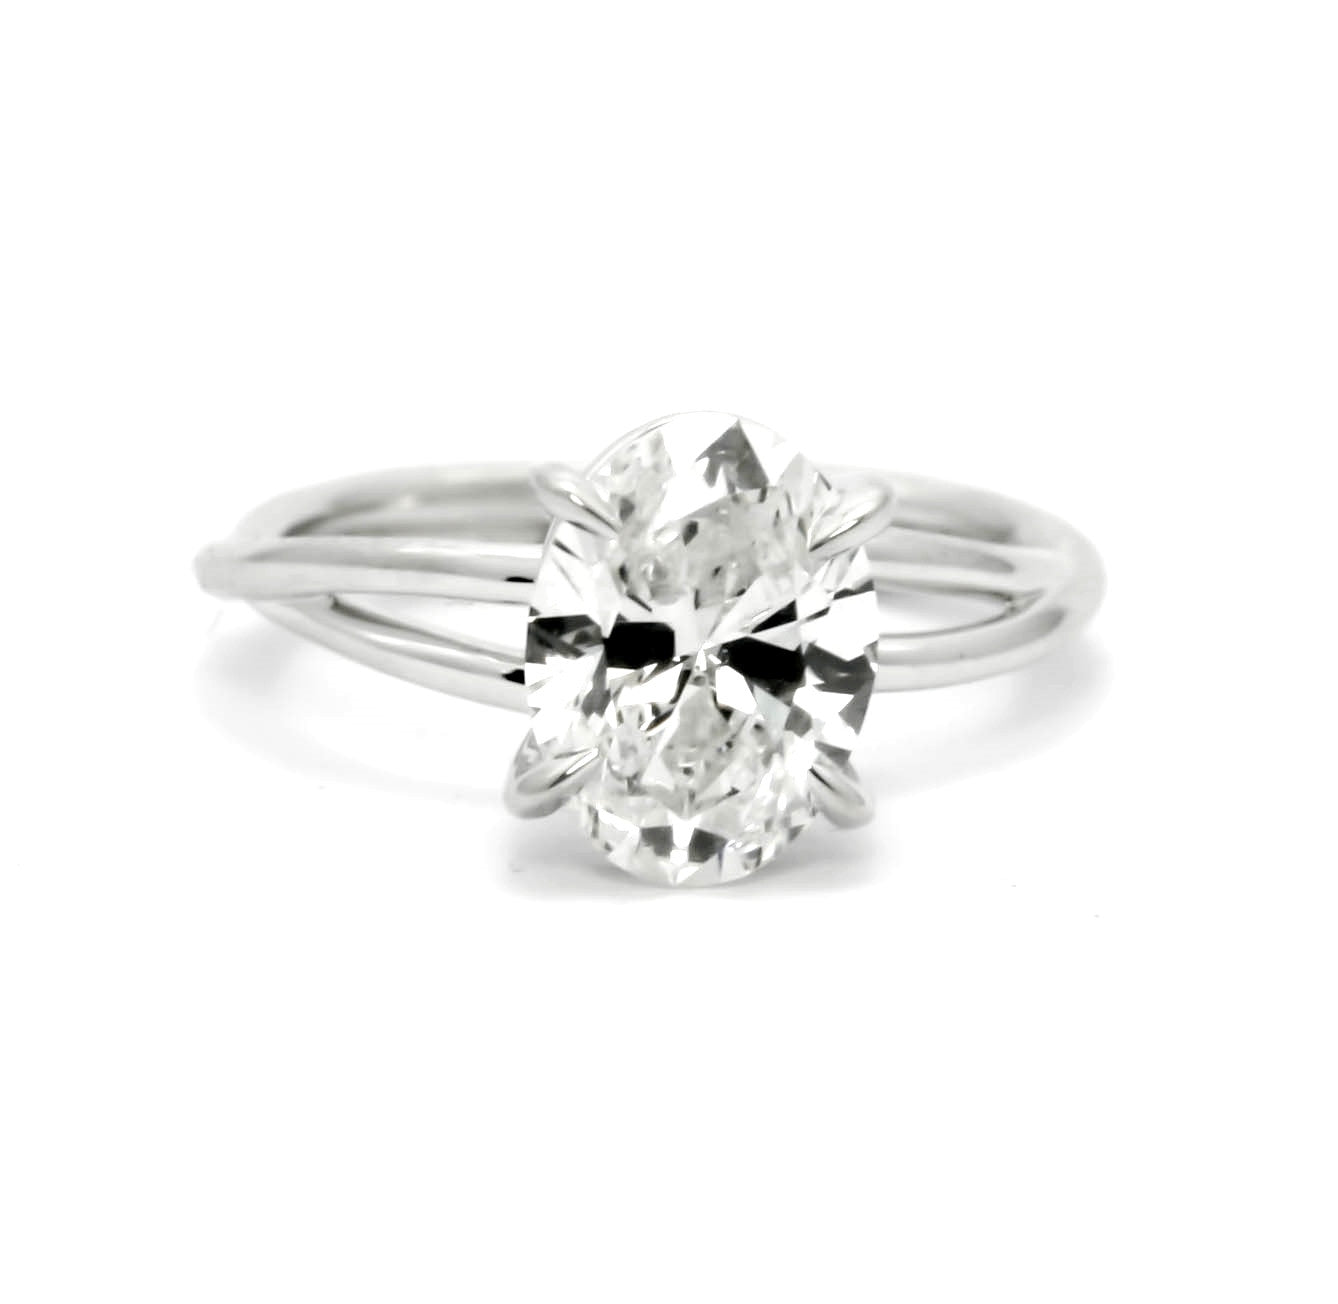 Unique 1.5 Carat Oval Forever One Moissanite Engagement Ring Twisted Shank - OFBV0015